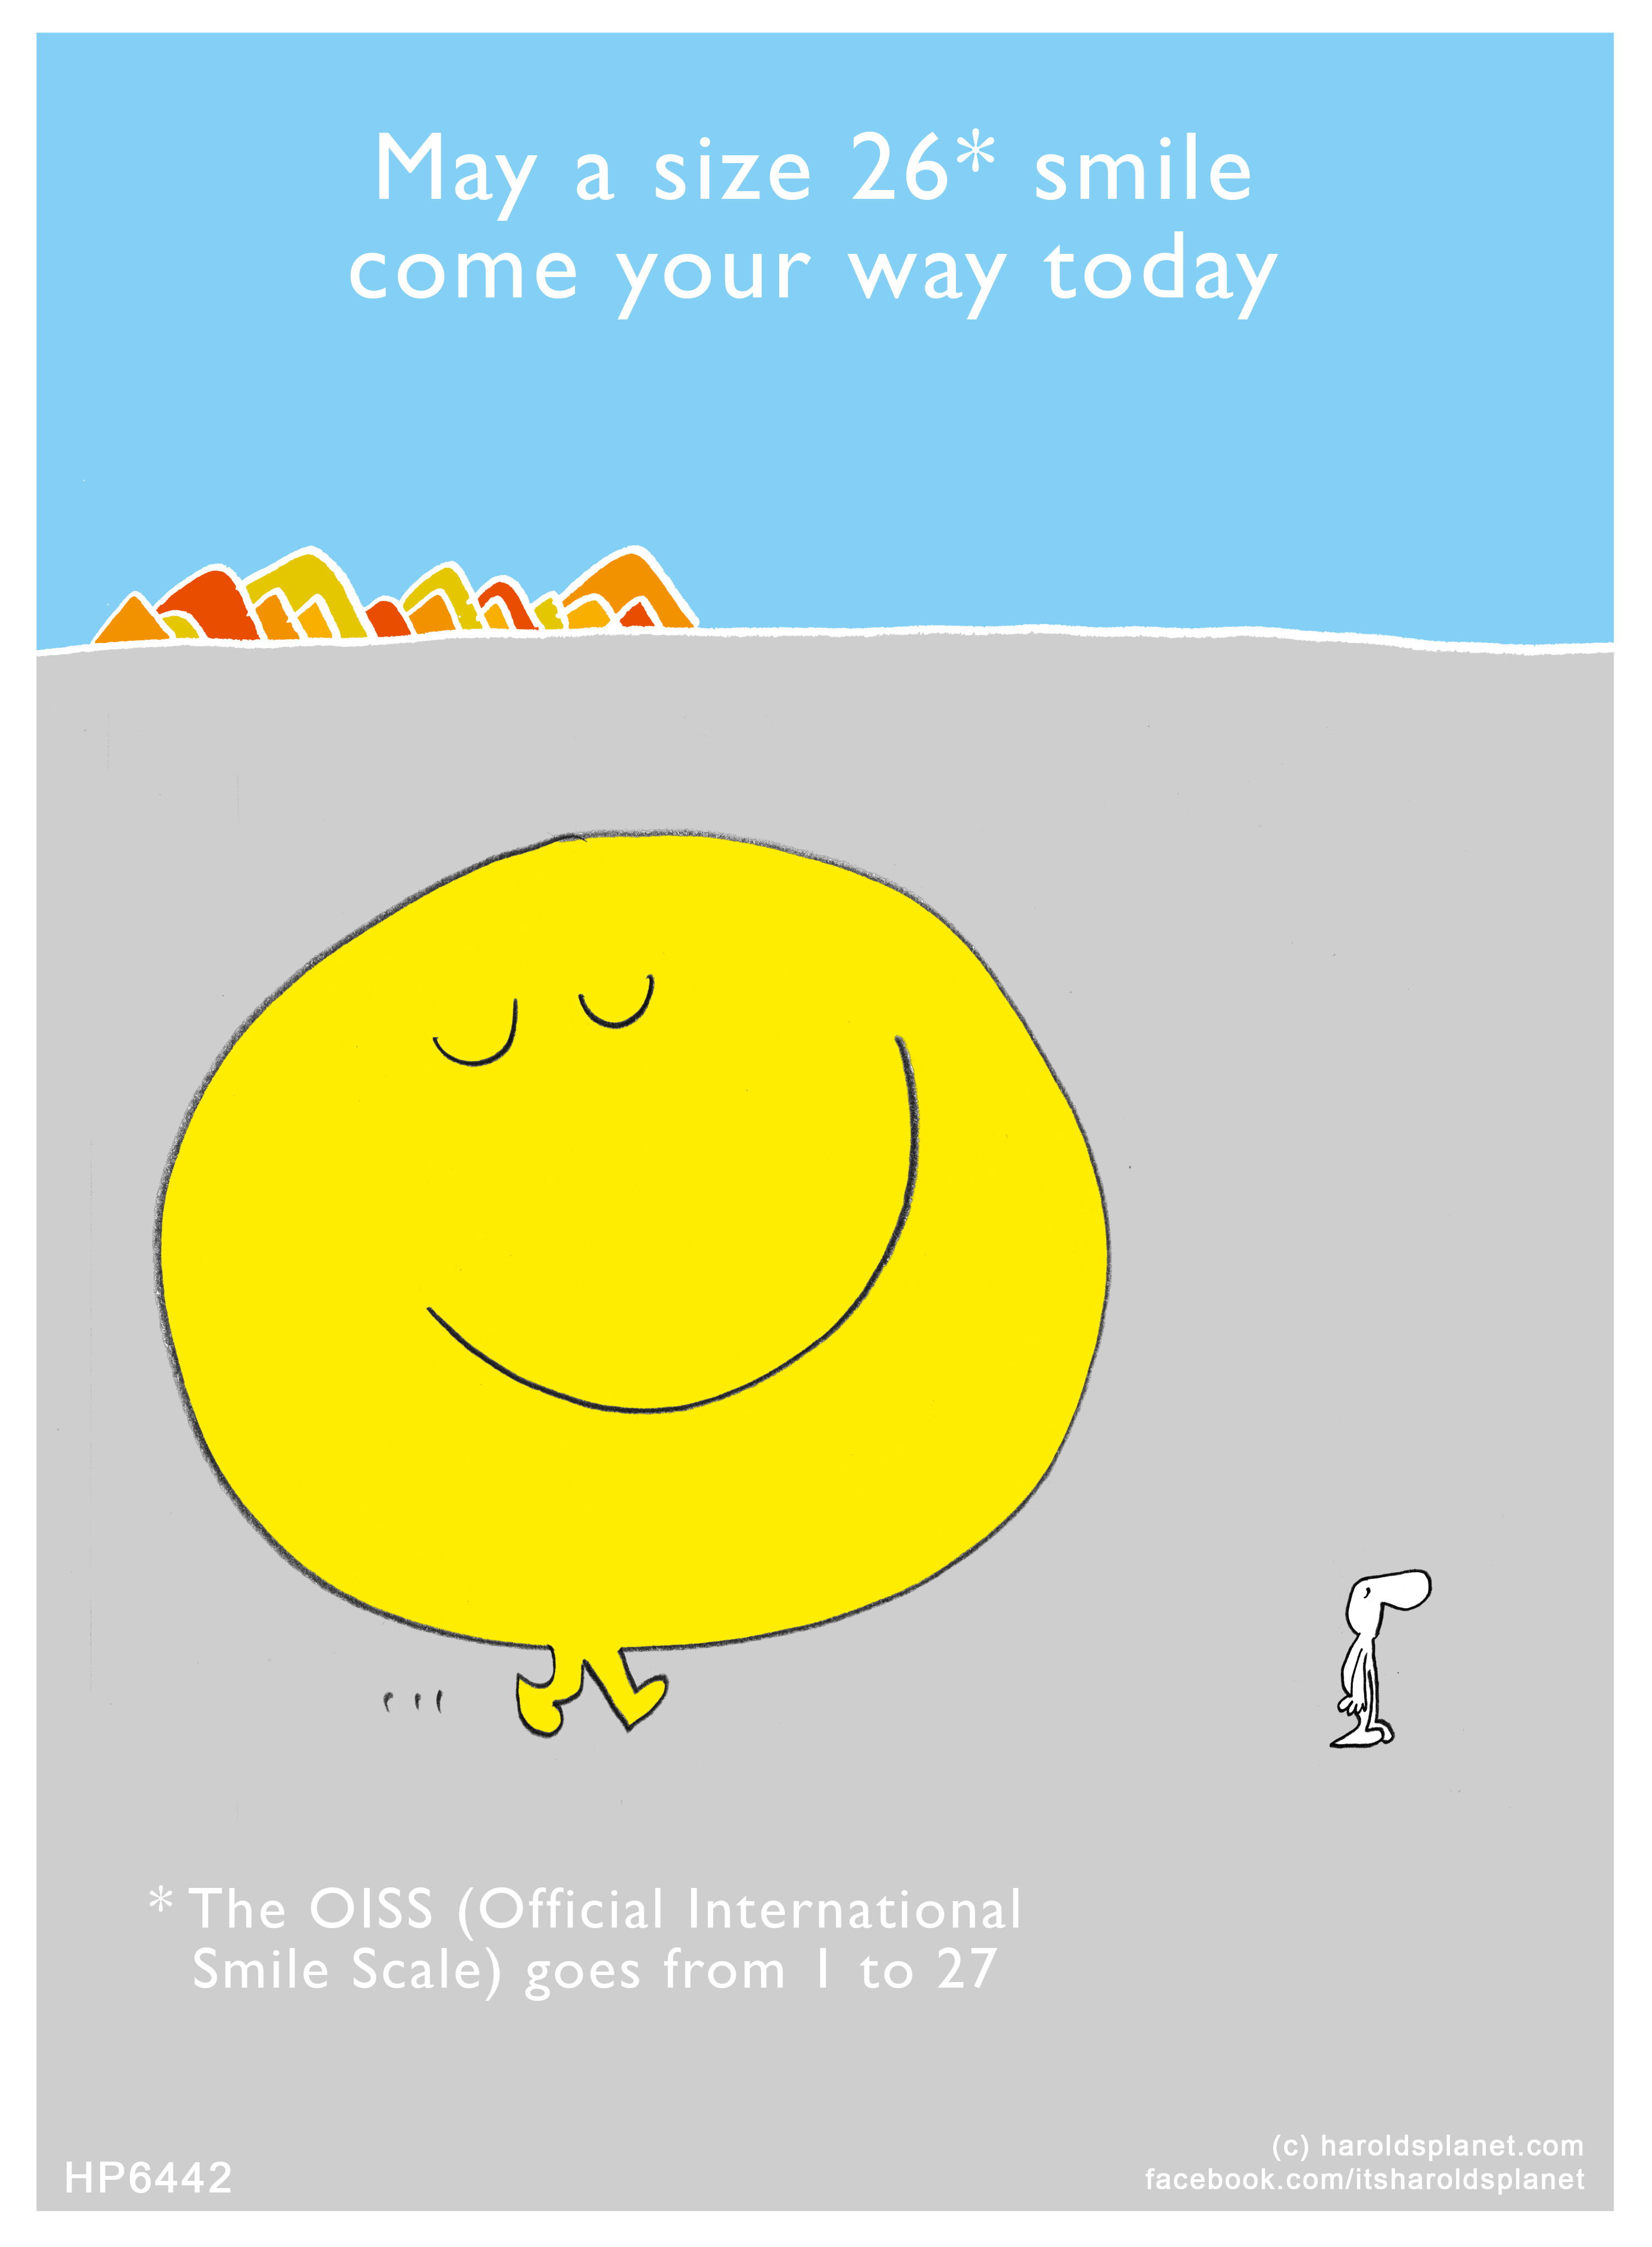 Harold's Planet: May a size 26* smile come your way today - * The OISS (Official International Smile Scale) goes from 1 to 27
